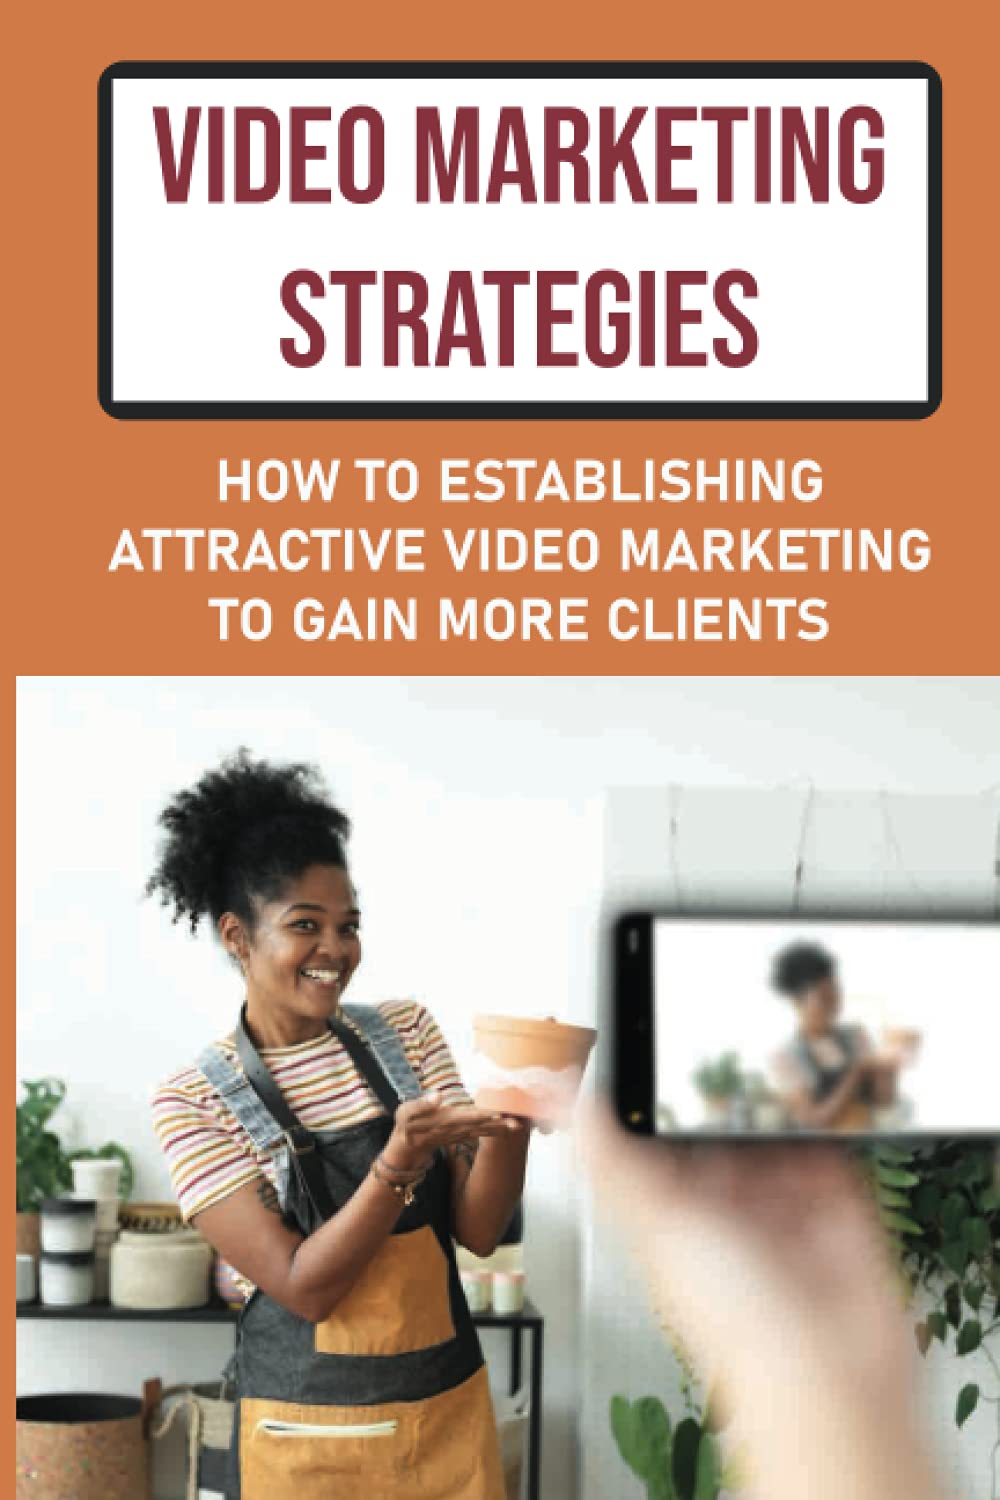 Video Marketing Strategies: How To Establishing Attractive Video Marketing To Gain More Clients: Taking Advantage Of Video Marketing